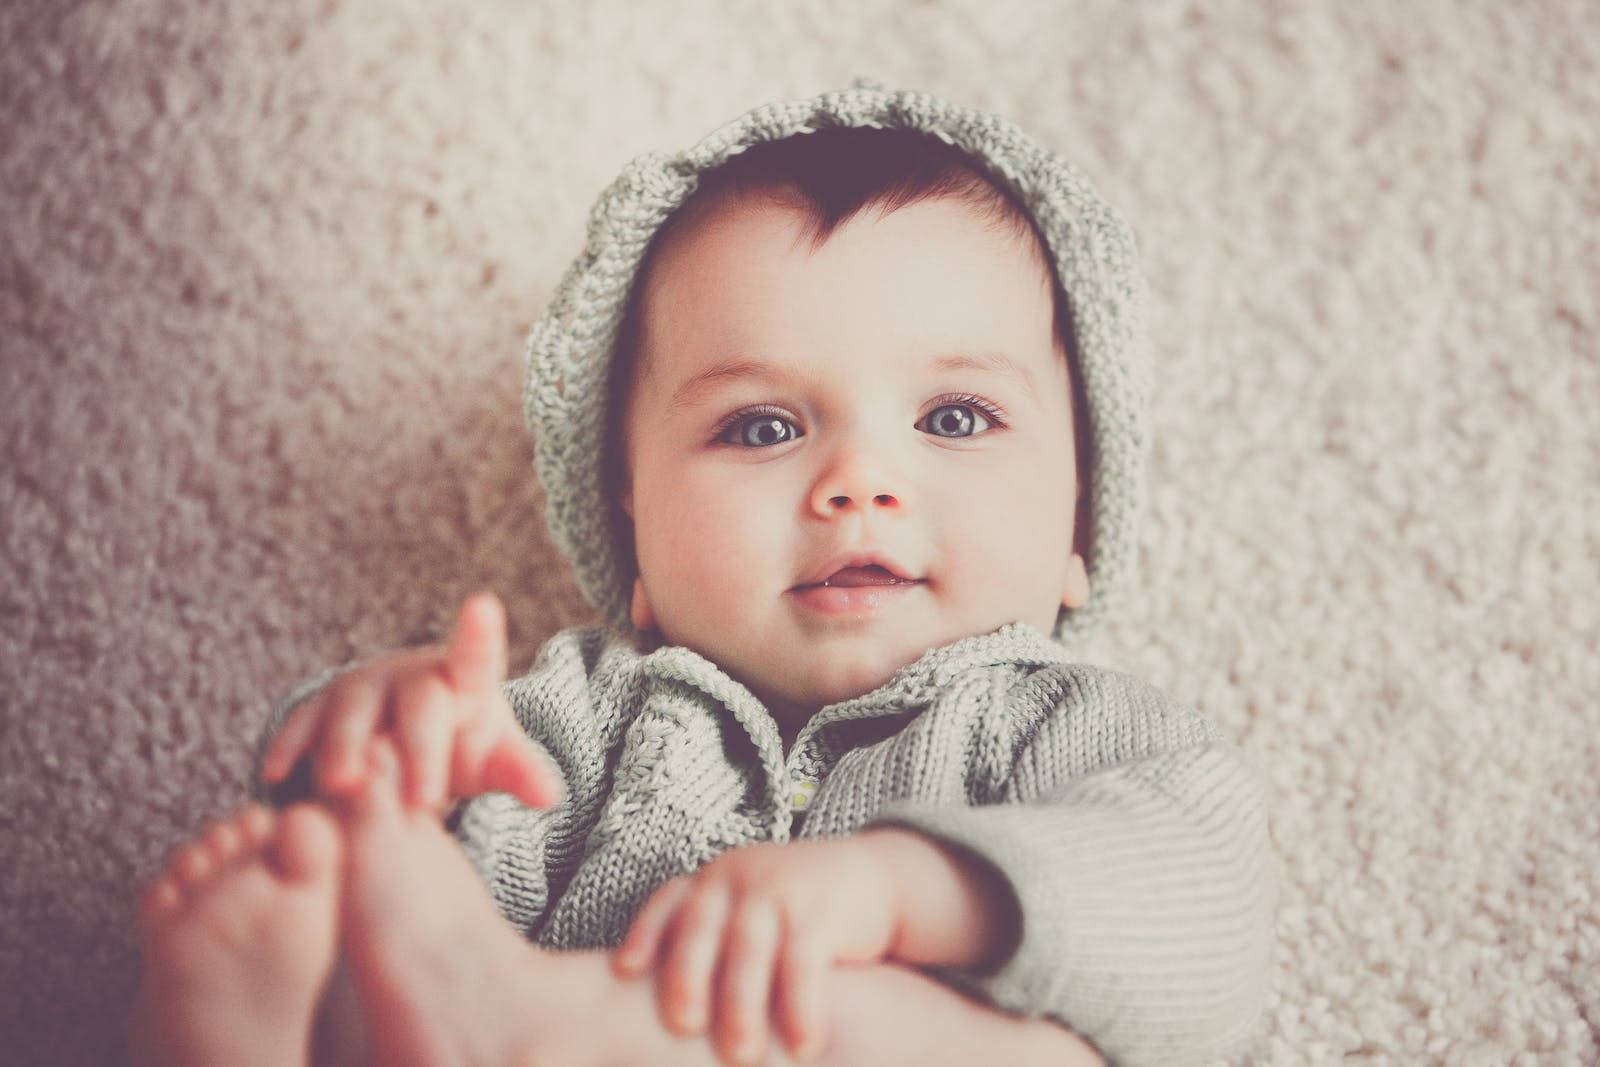 Baby Boy Wearing Gray Knitted Outfit Wallpaper